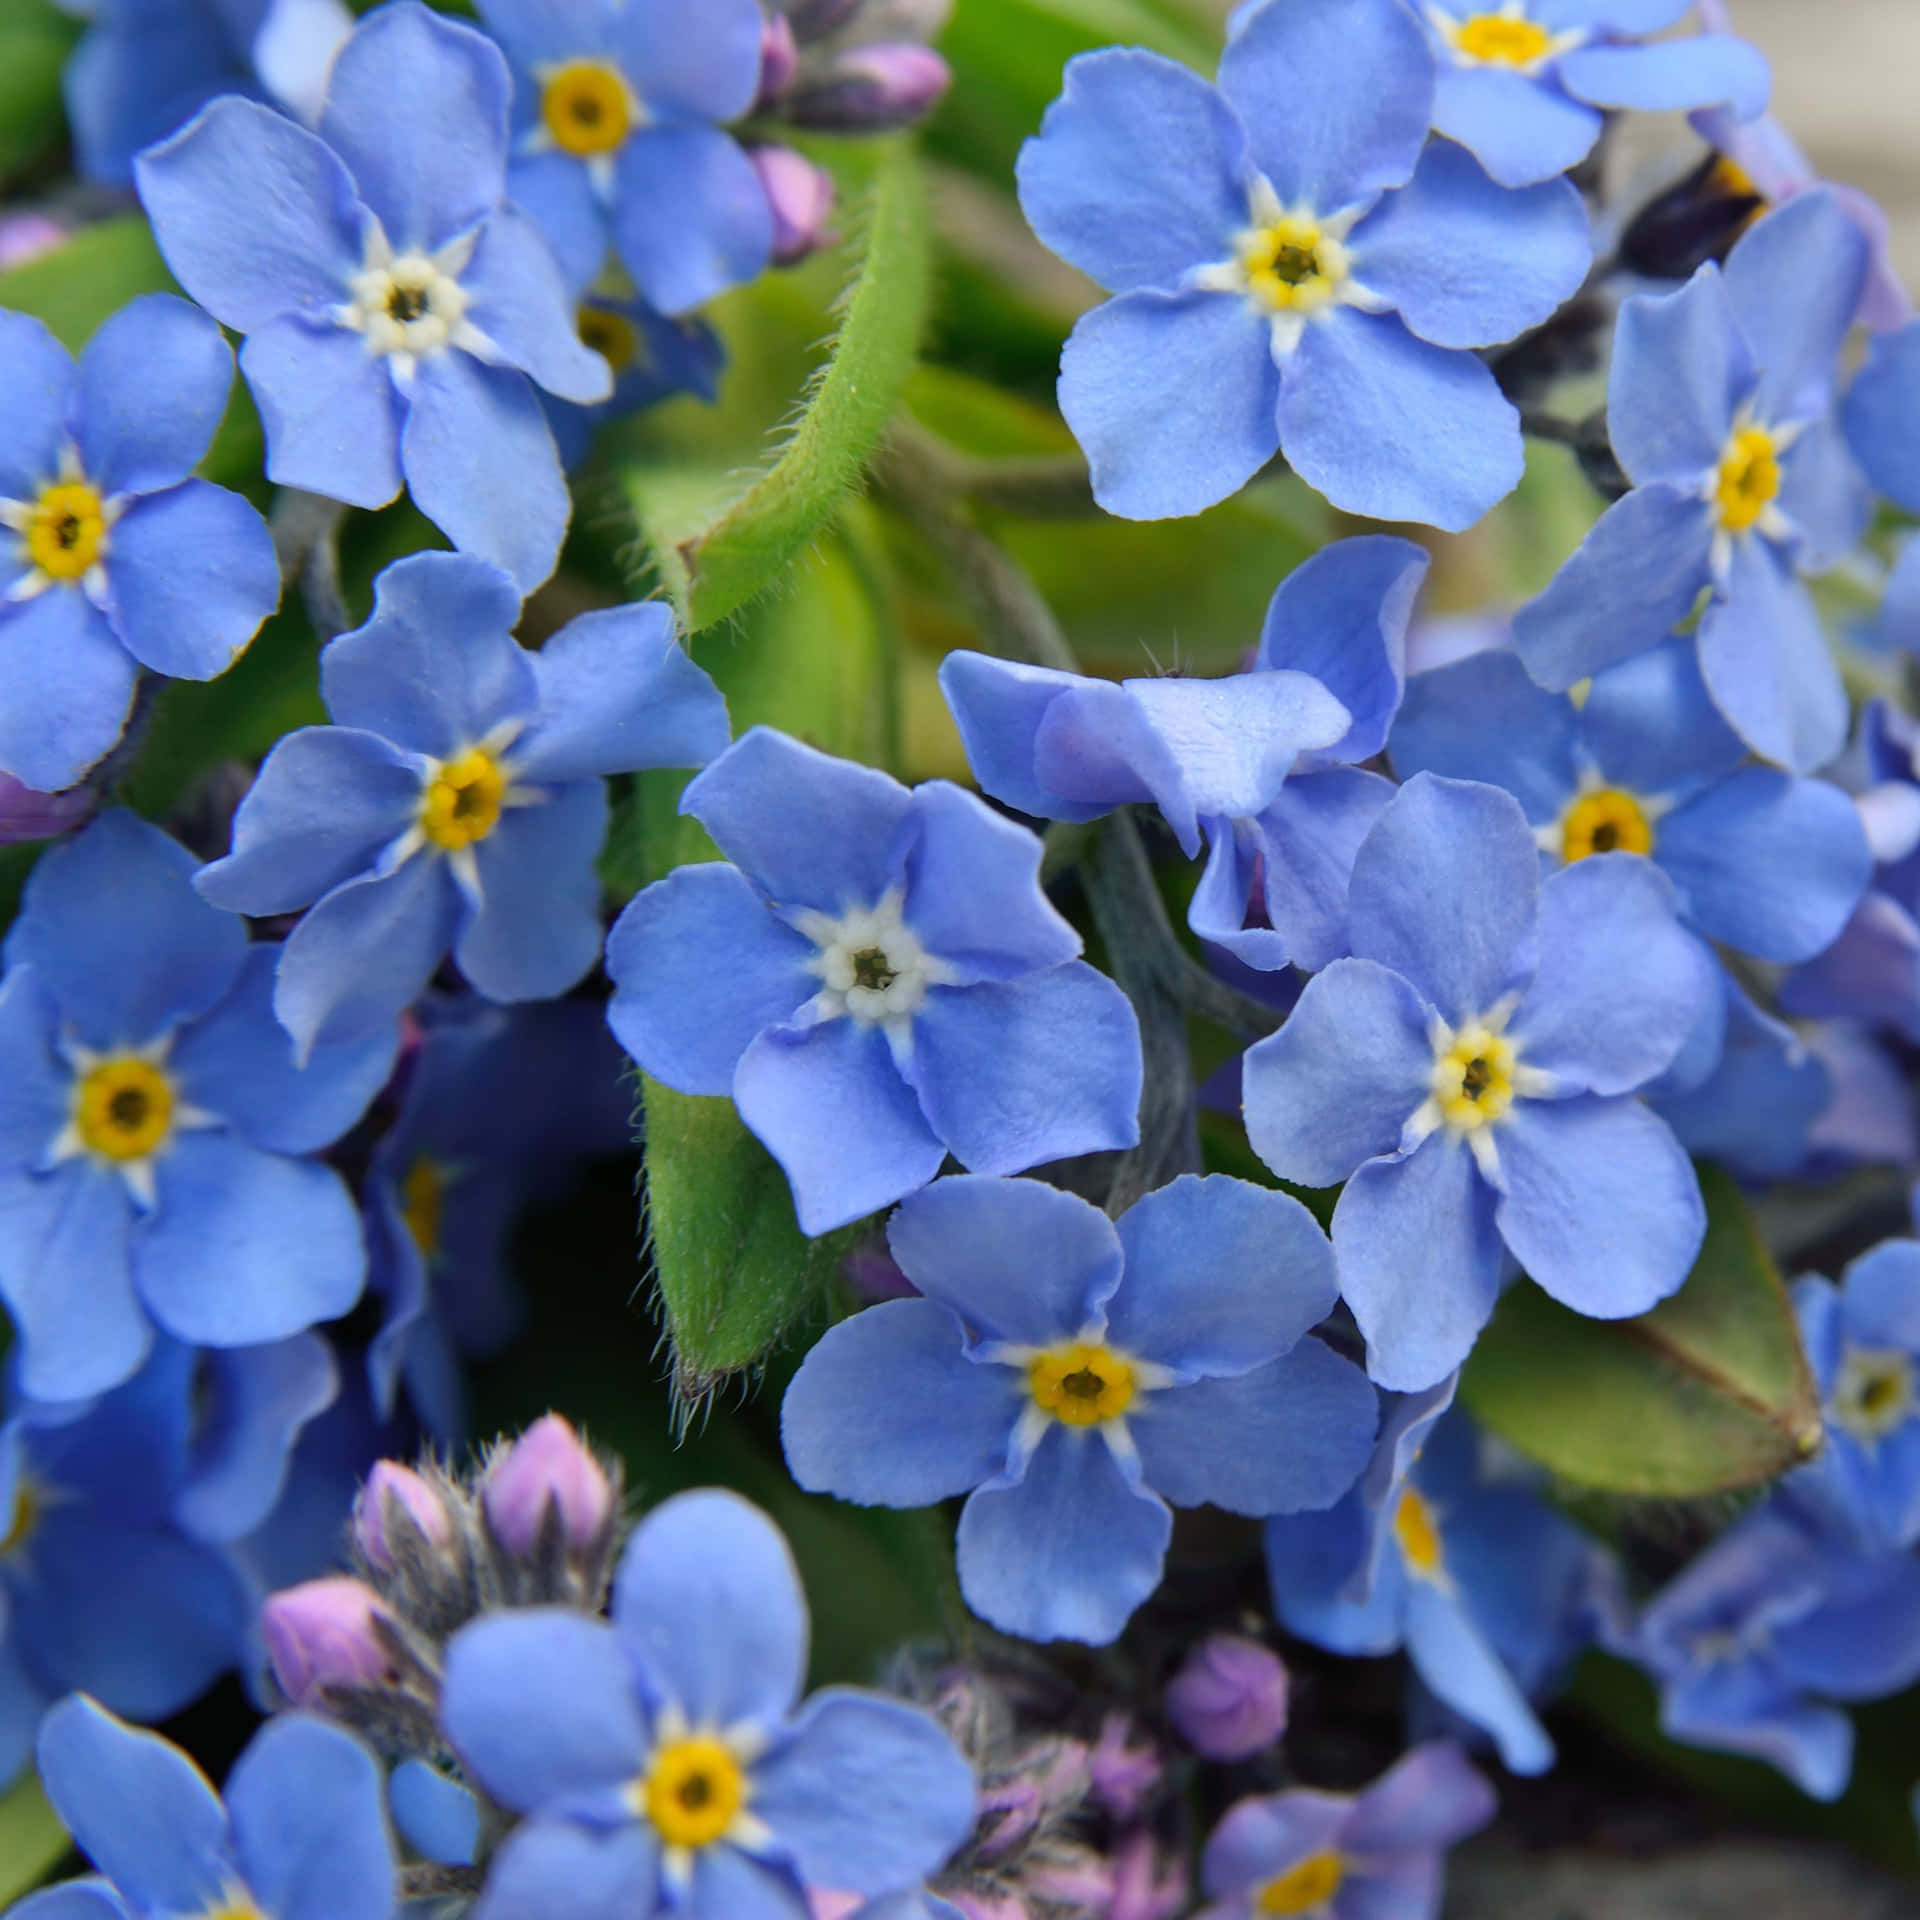 A Close Up Of Blue Flowers